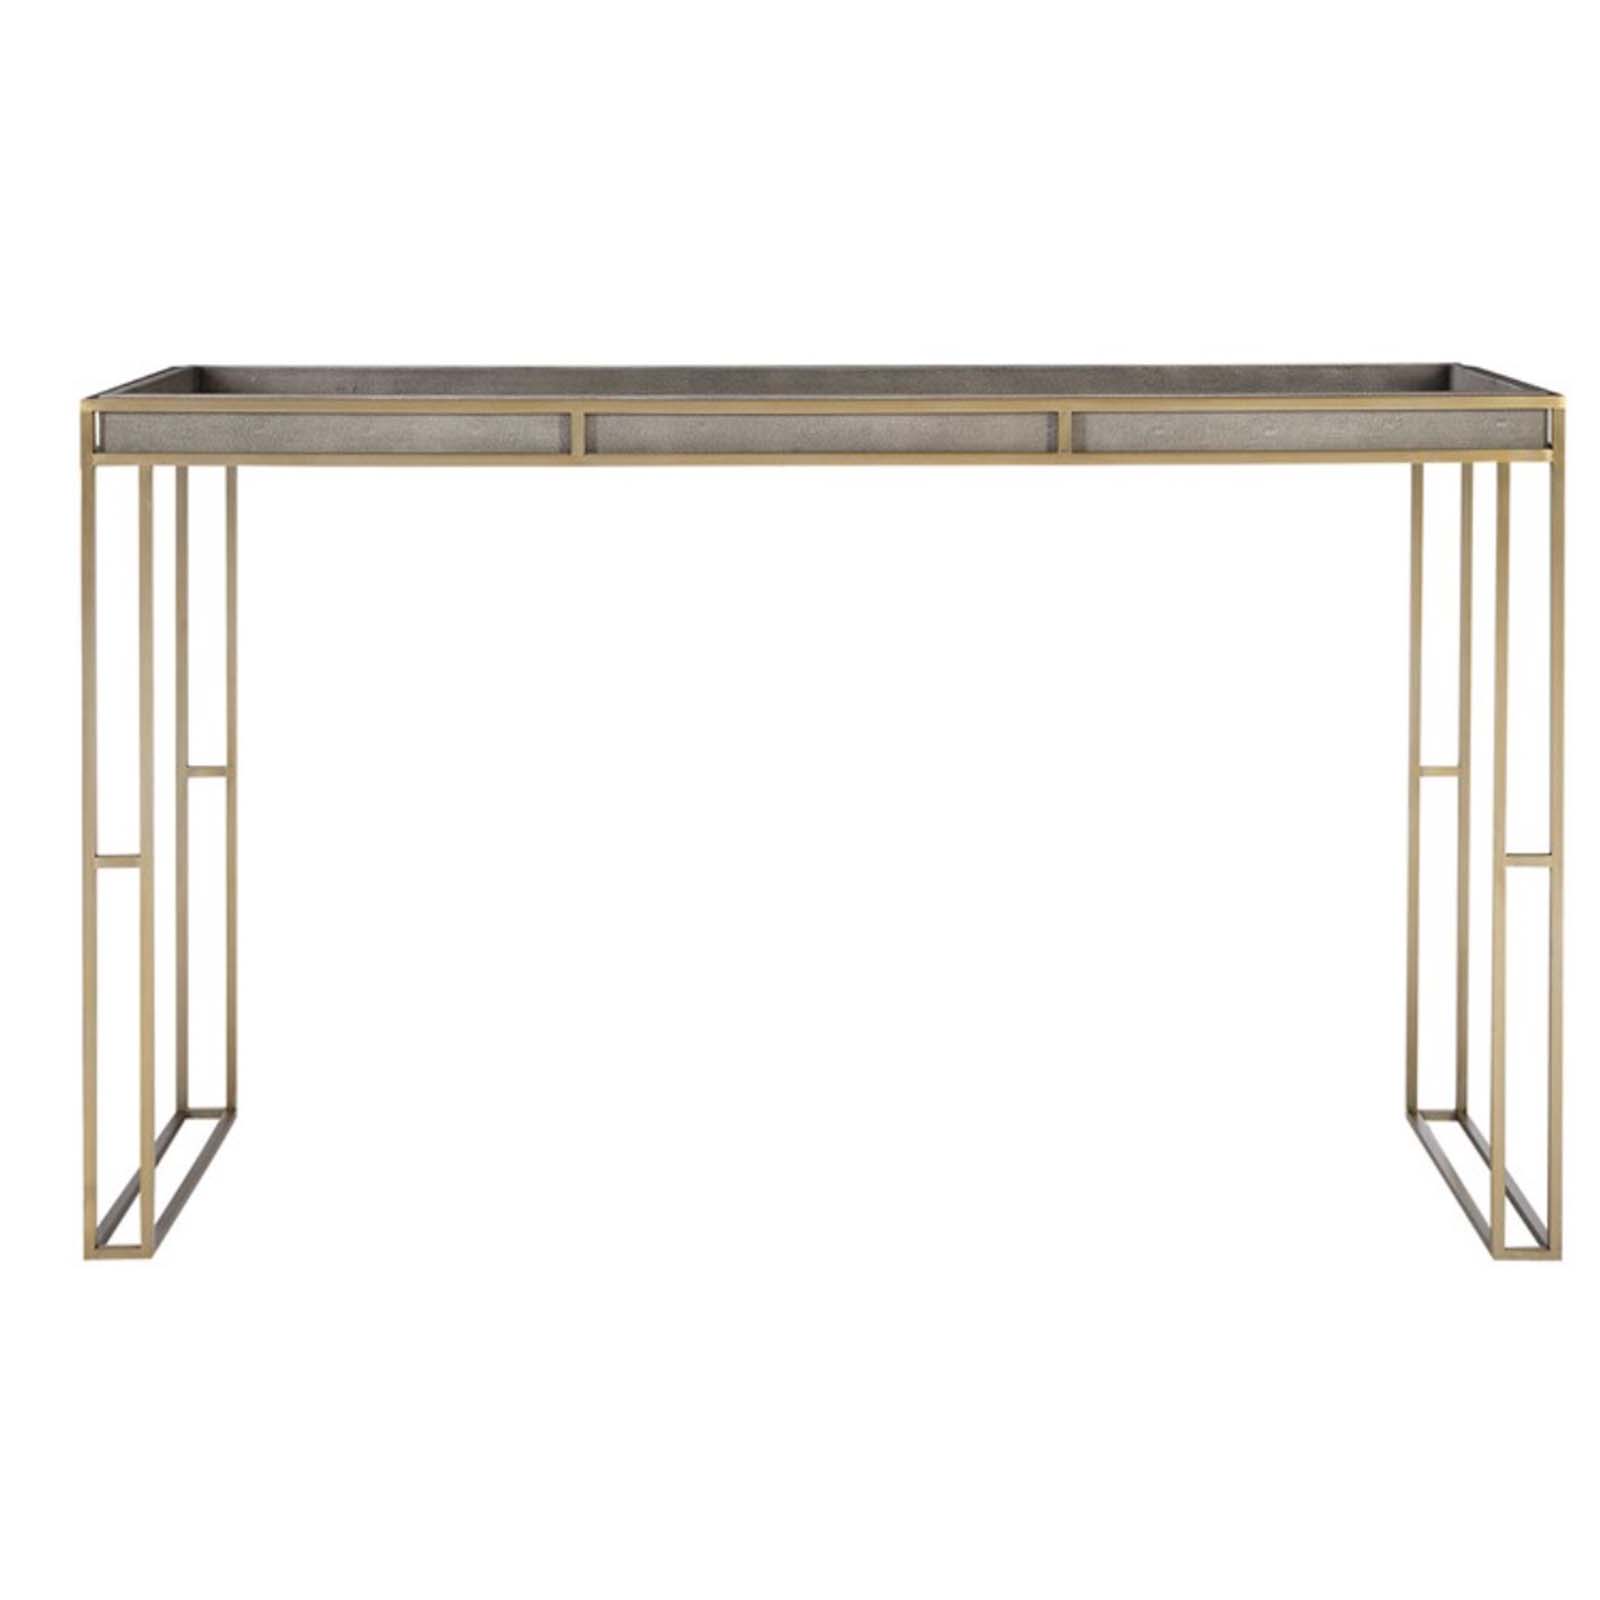 Cardew 54" Console Table